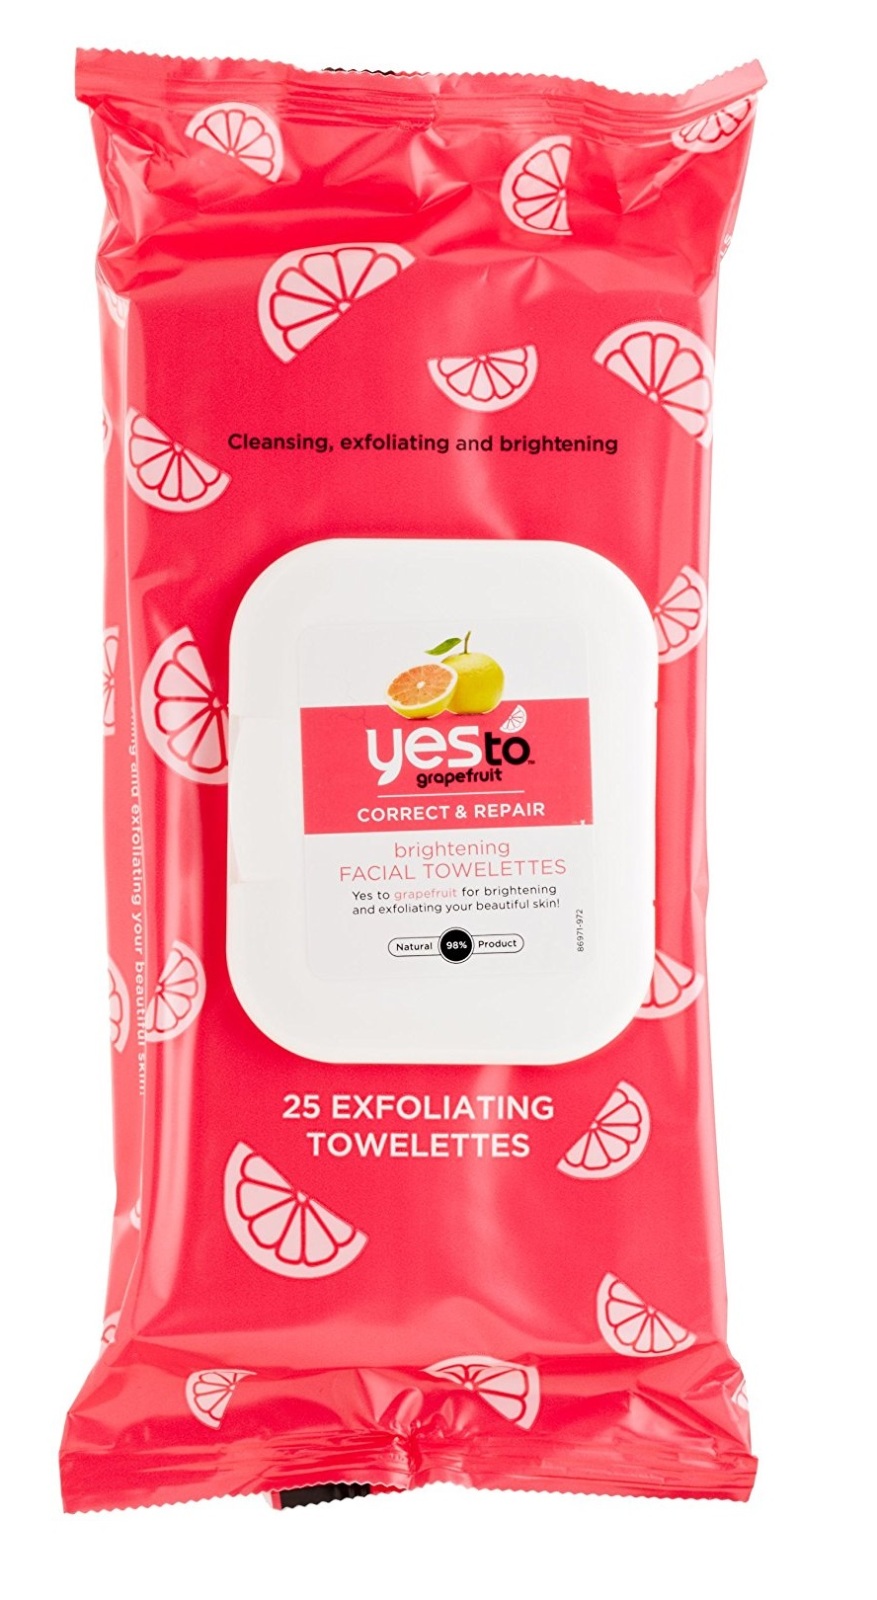 Yes to Grapefruit Brightening Facial Towelettes 25 ct - image 1 of 2